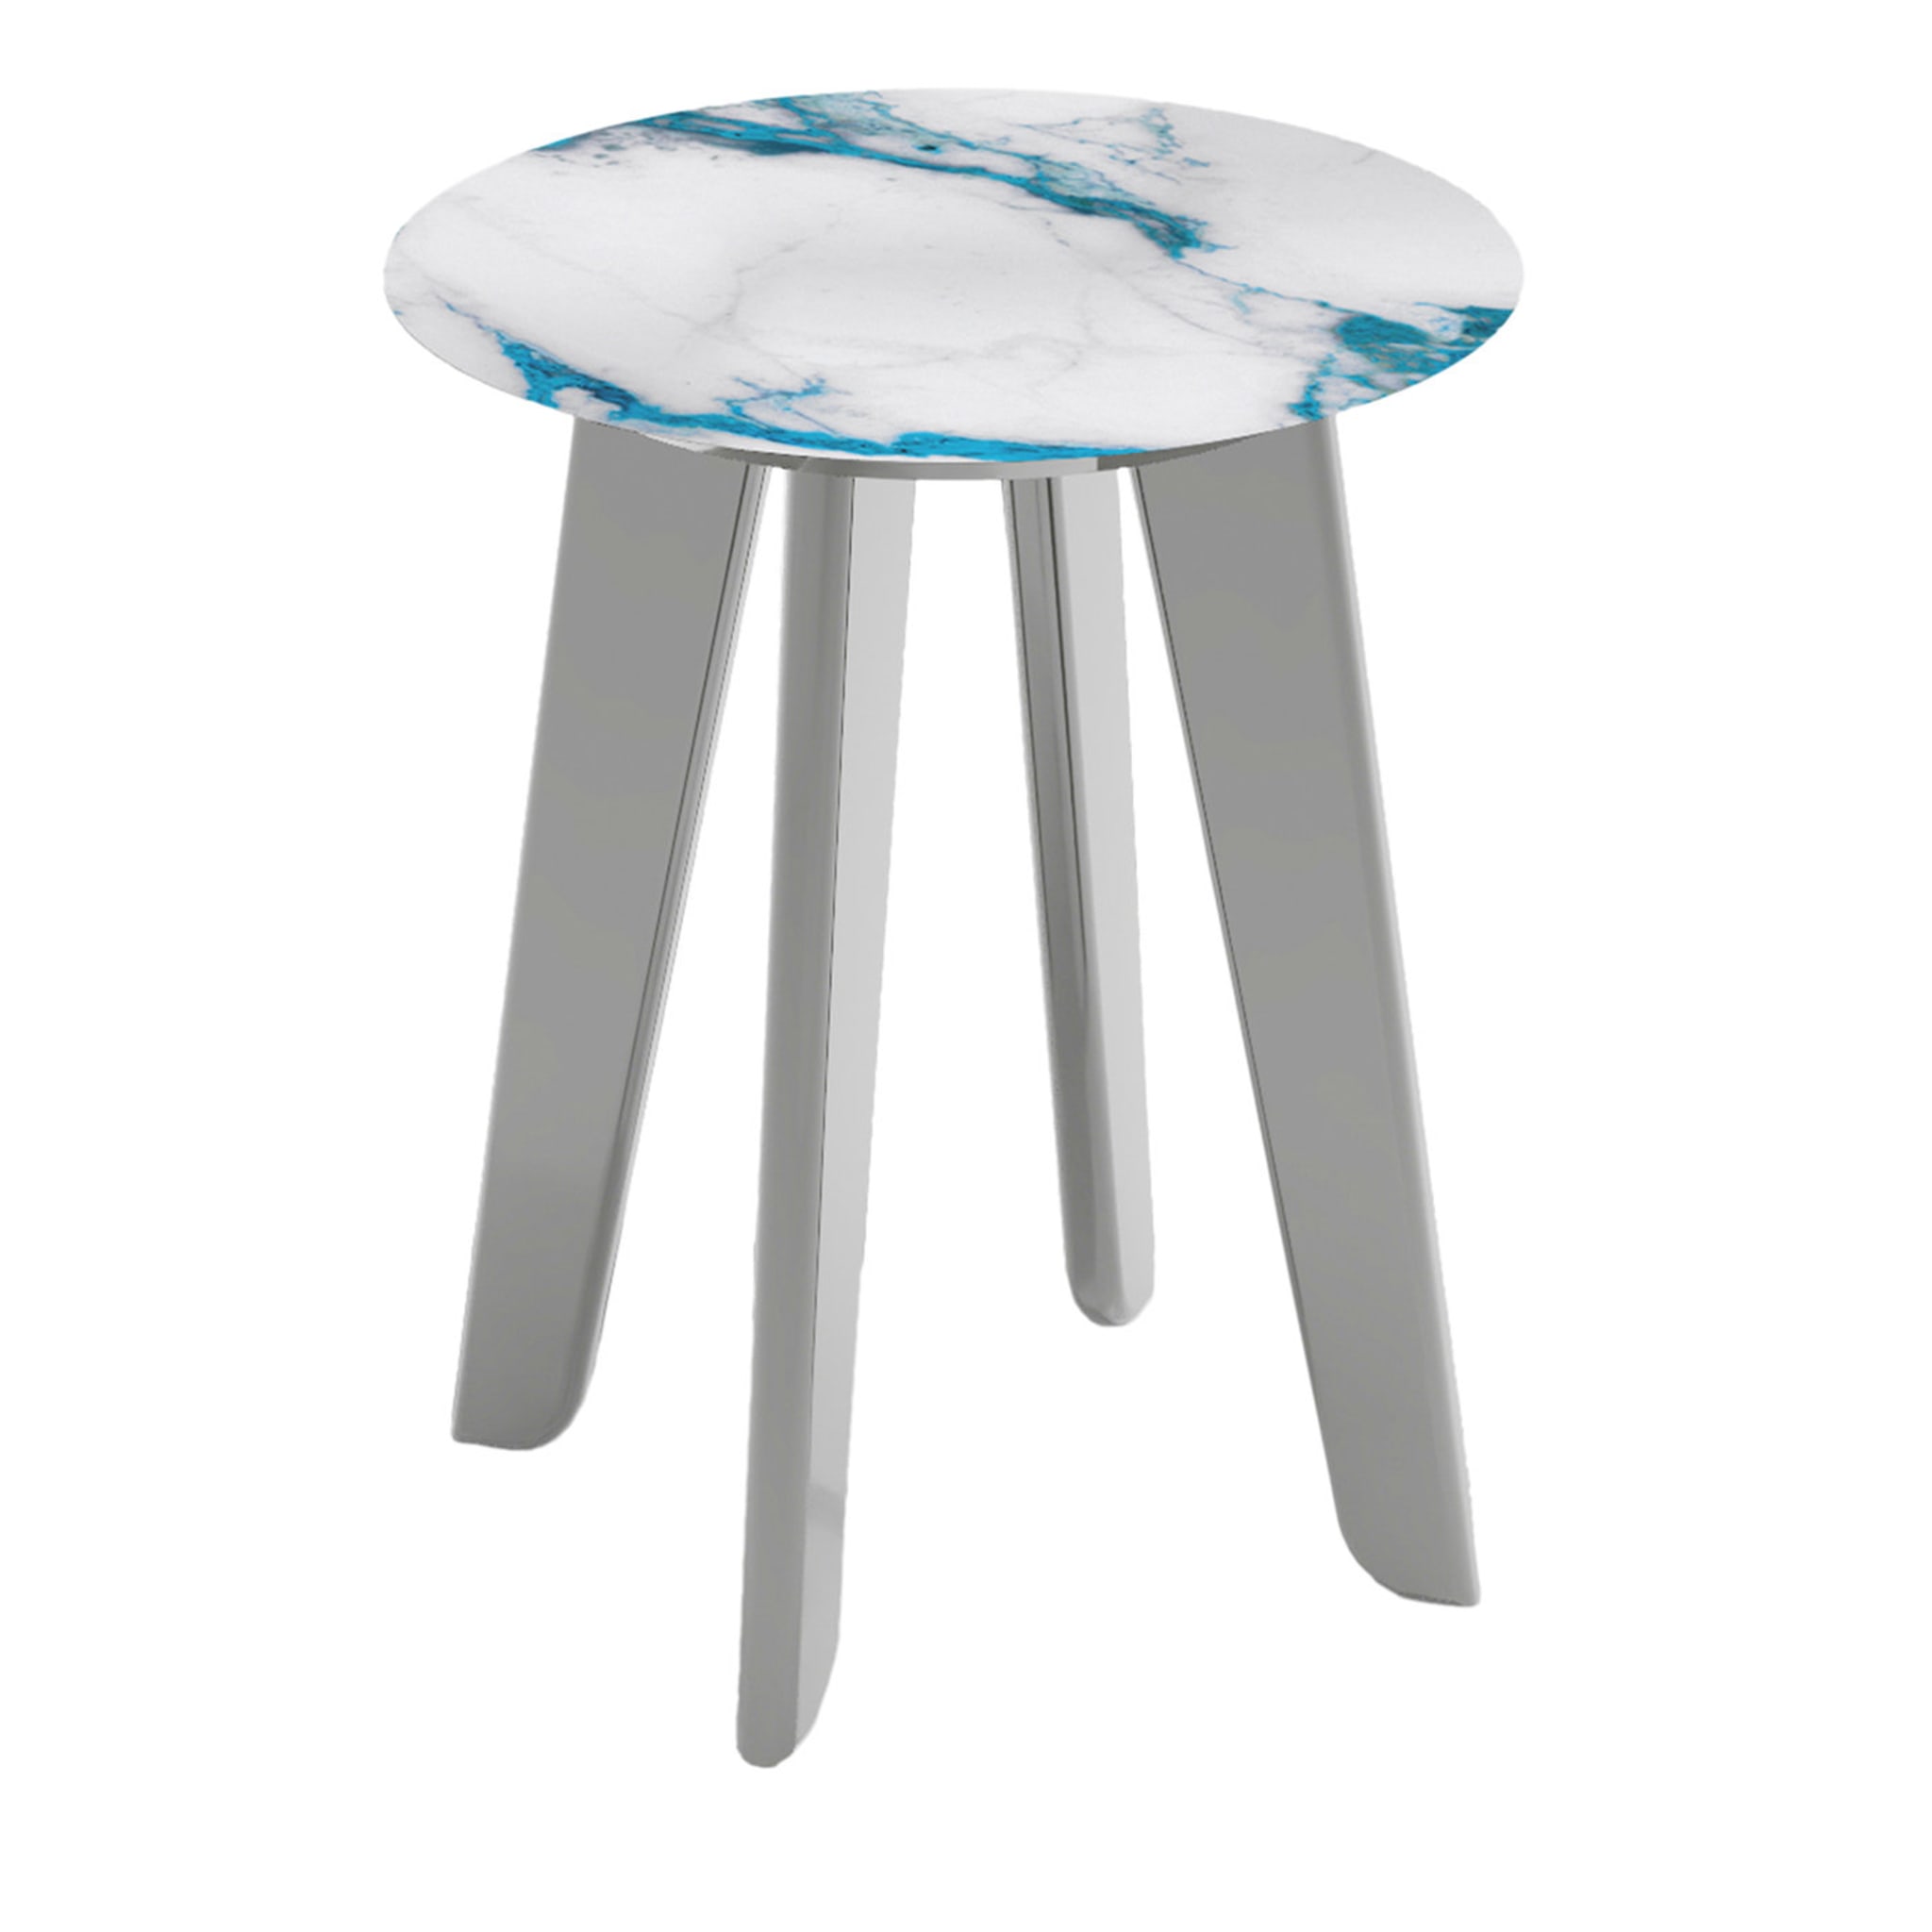 Owen Tall Round Side Table with White and Turquoise Top - Main view